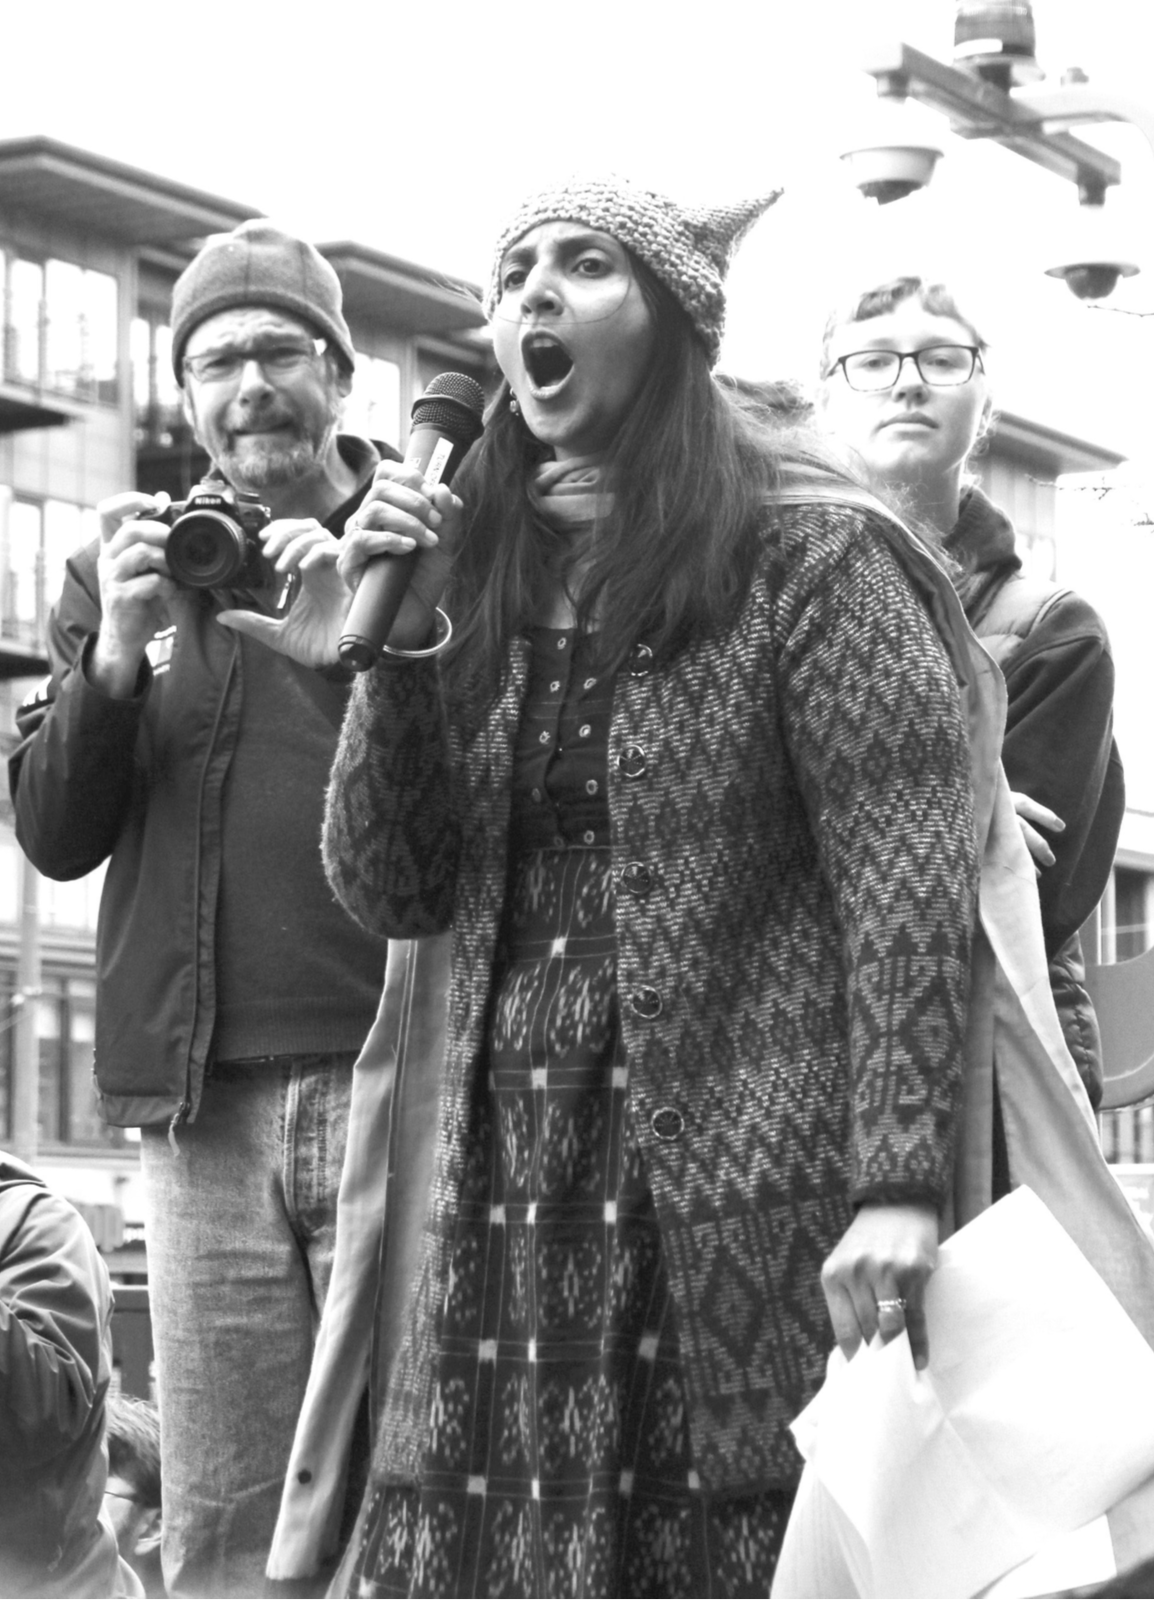 Miles WhitworthCouncilwoman Kshama Sawant speaking at the Inauguration Day protest. She is one of very few socialists elected to political office in the country.